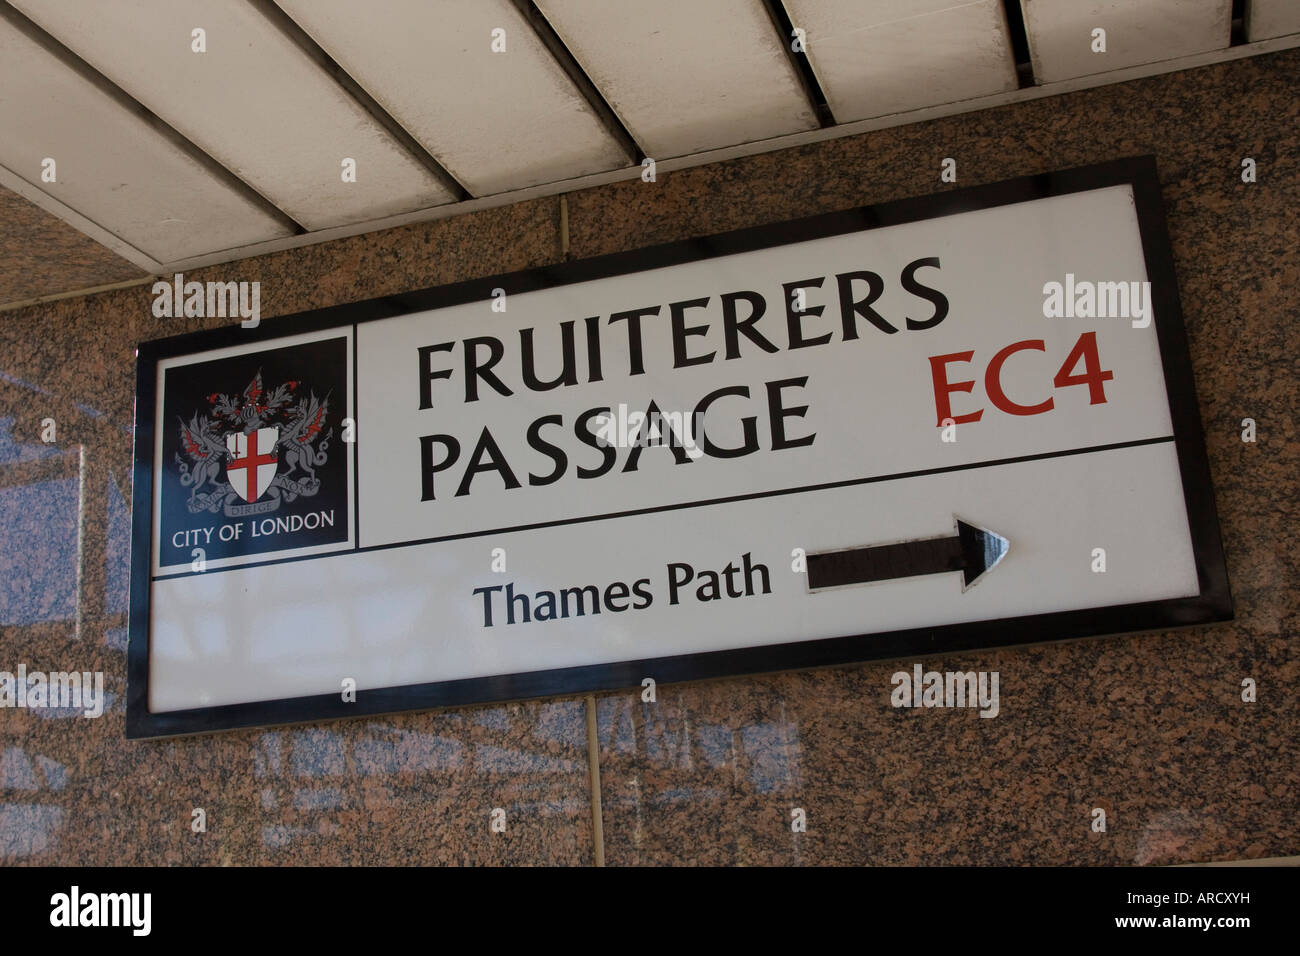 Sign Fruiterers Passage  EC4 by the River Thames City of London GB UK Stock Photo